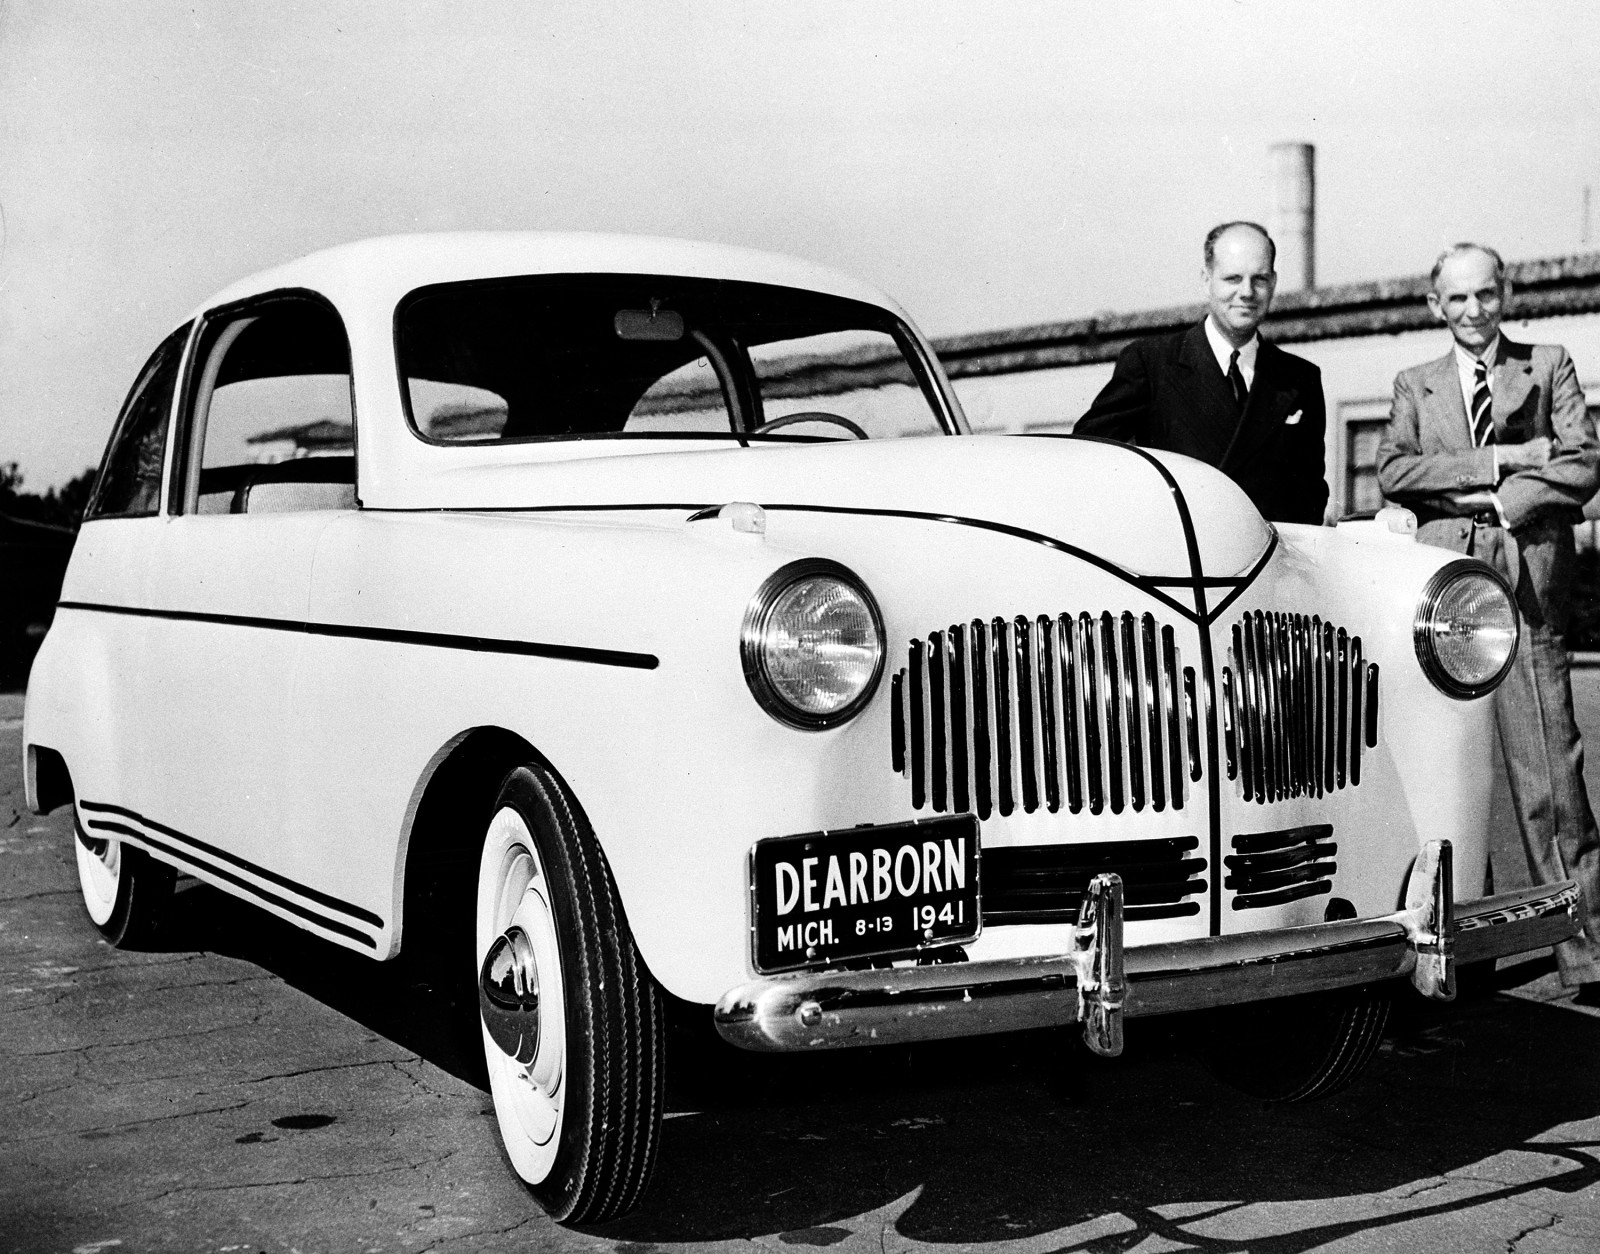 Ford Motor Company founder Henry Ford, right, unveils his new plastic automobile, developed from agricultural products, in Dearborn, Mich., Aug. 13, 1941.  Robert A. Boyer, in charge of Ford Plastics development, is at left.  The experimental, handmade automobile has a plastic body made from soybean and fibers such as field straw, hemp and flax.  The car runs on gasoline and corn-derived ethanol.  (AP Photo)